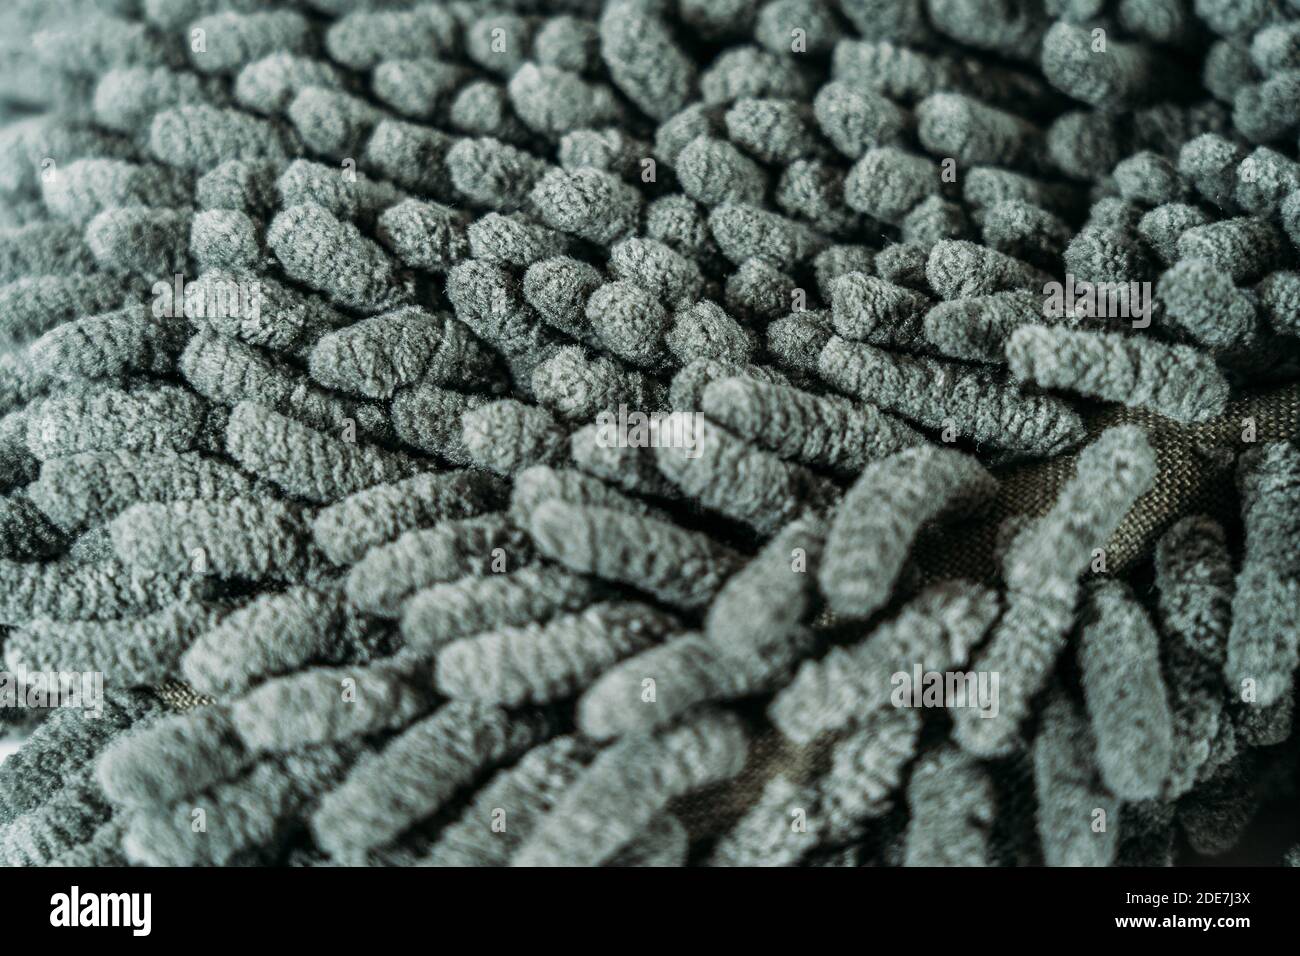 Gray fibers of microfiber fabric - fabric made from polyester fibers, may consist of polyamide and other polymers. Stock Photo